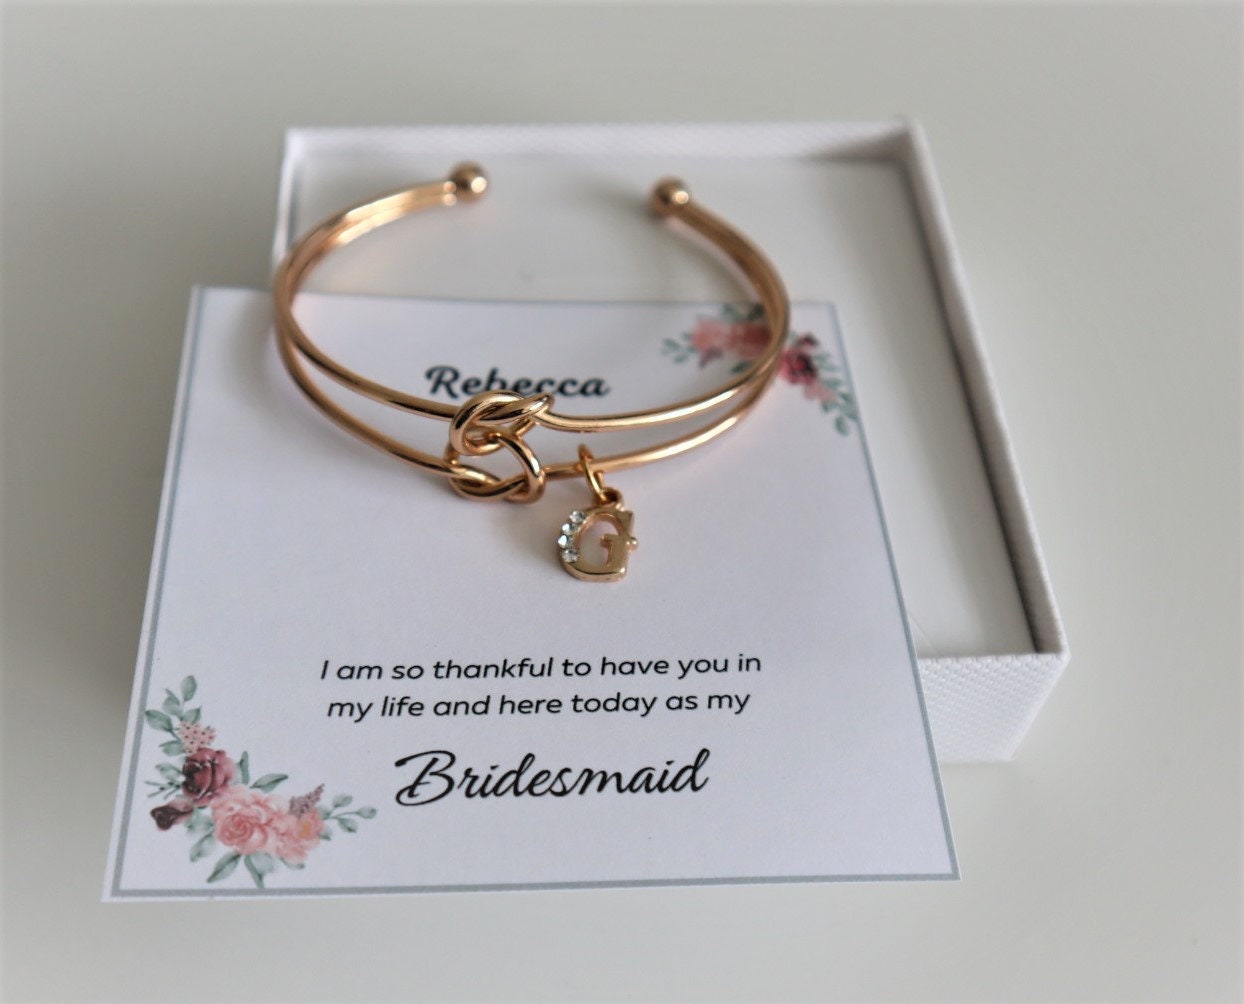 Bridesmaid gift,Bridesmaid Proposal Box,Personalized Bridesmaid gift ,Will you be my bridesmaid,Initial Tie Knot Bracelet,Maid of Honor Gift